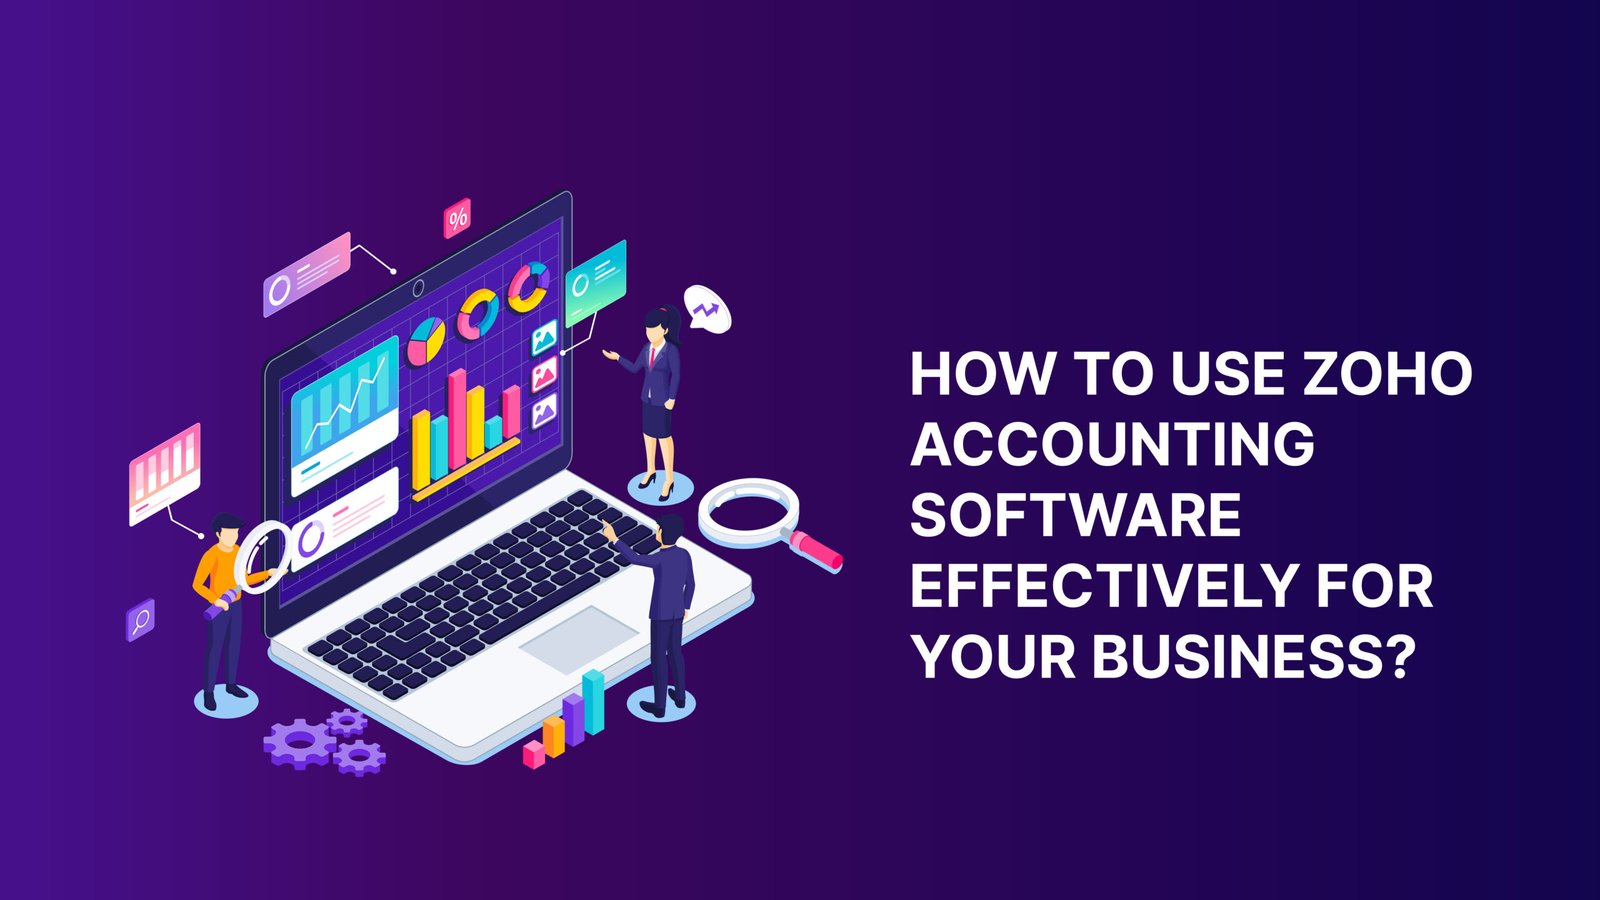 How to use Zoho accounting software effectively for your business